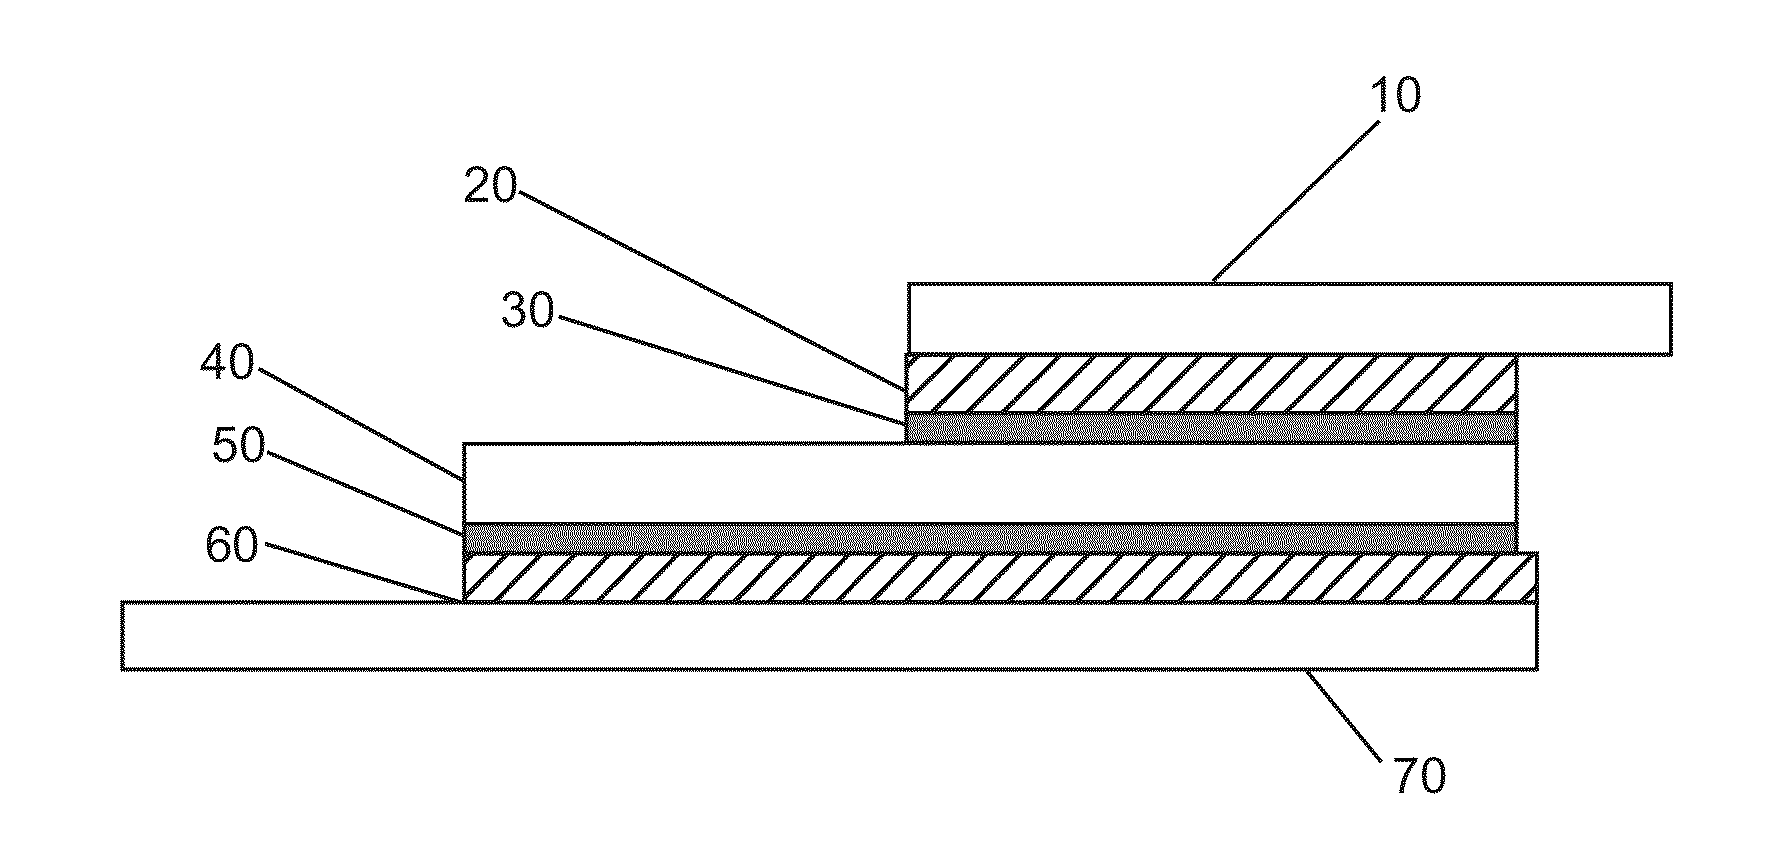 Semiconductor packaging containing sintering die-attach material